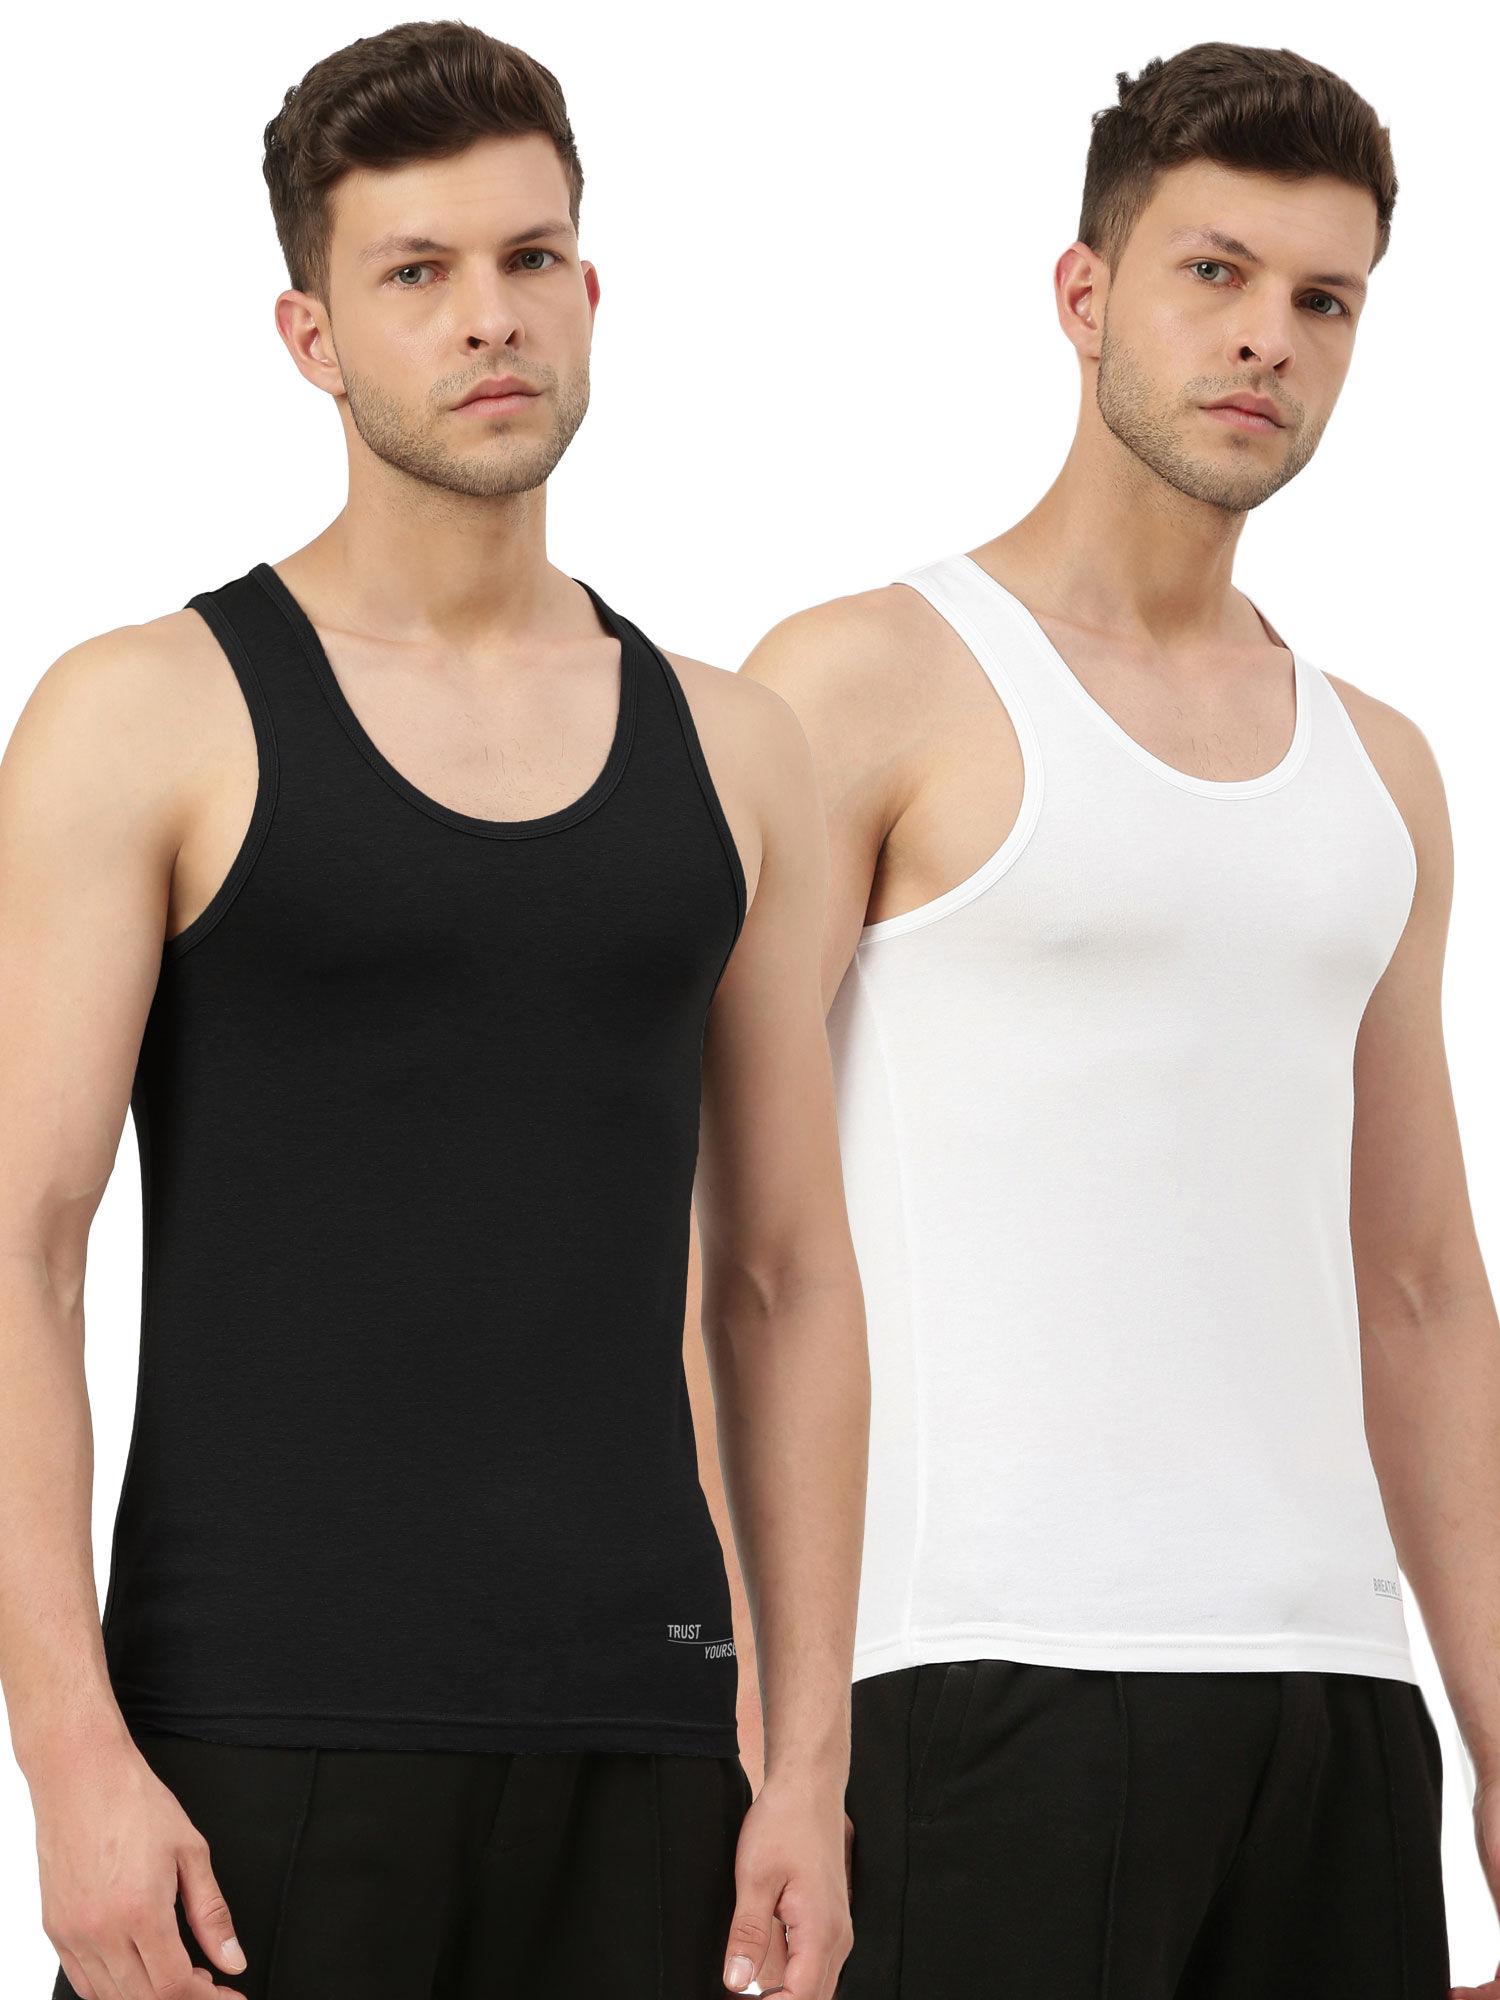 twin skin bamboo comfort vest - multi color (pack of 2)